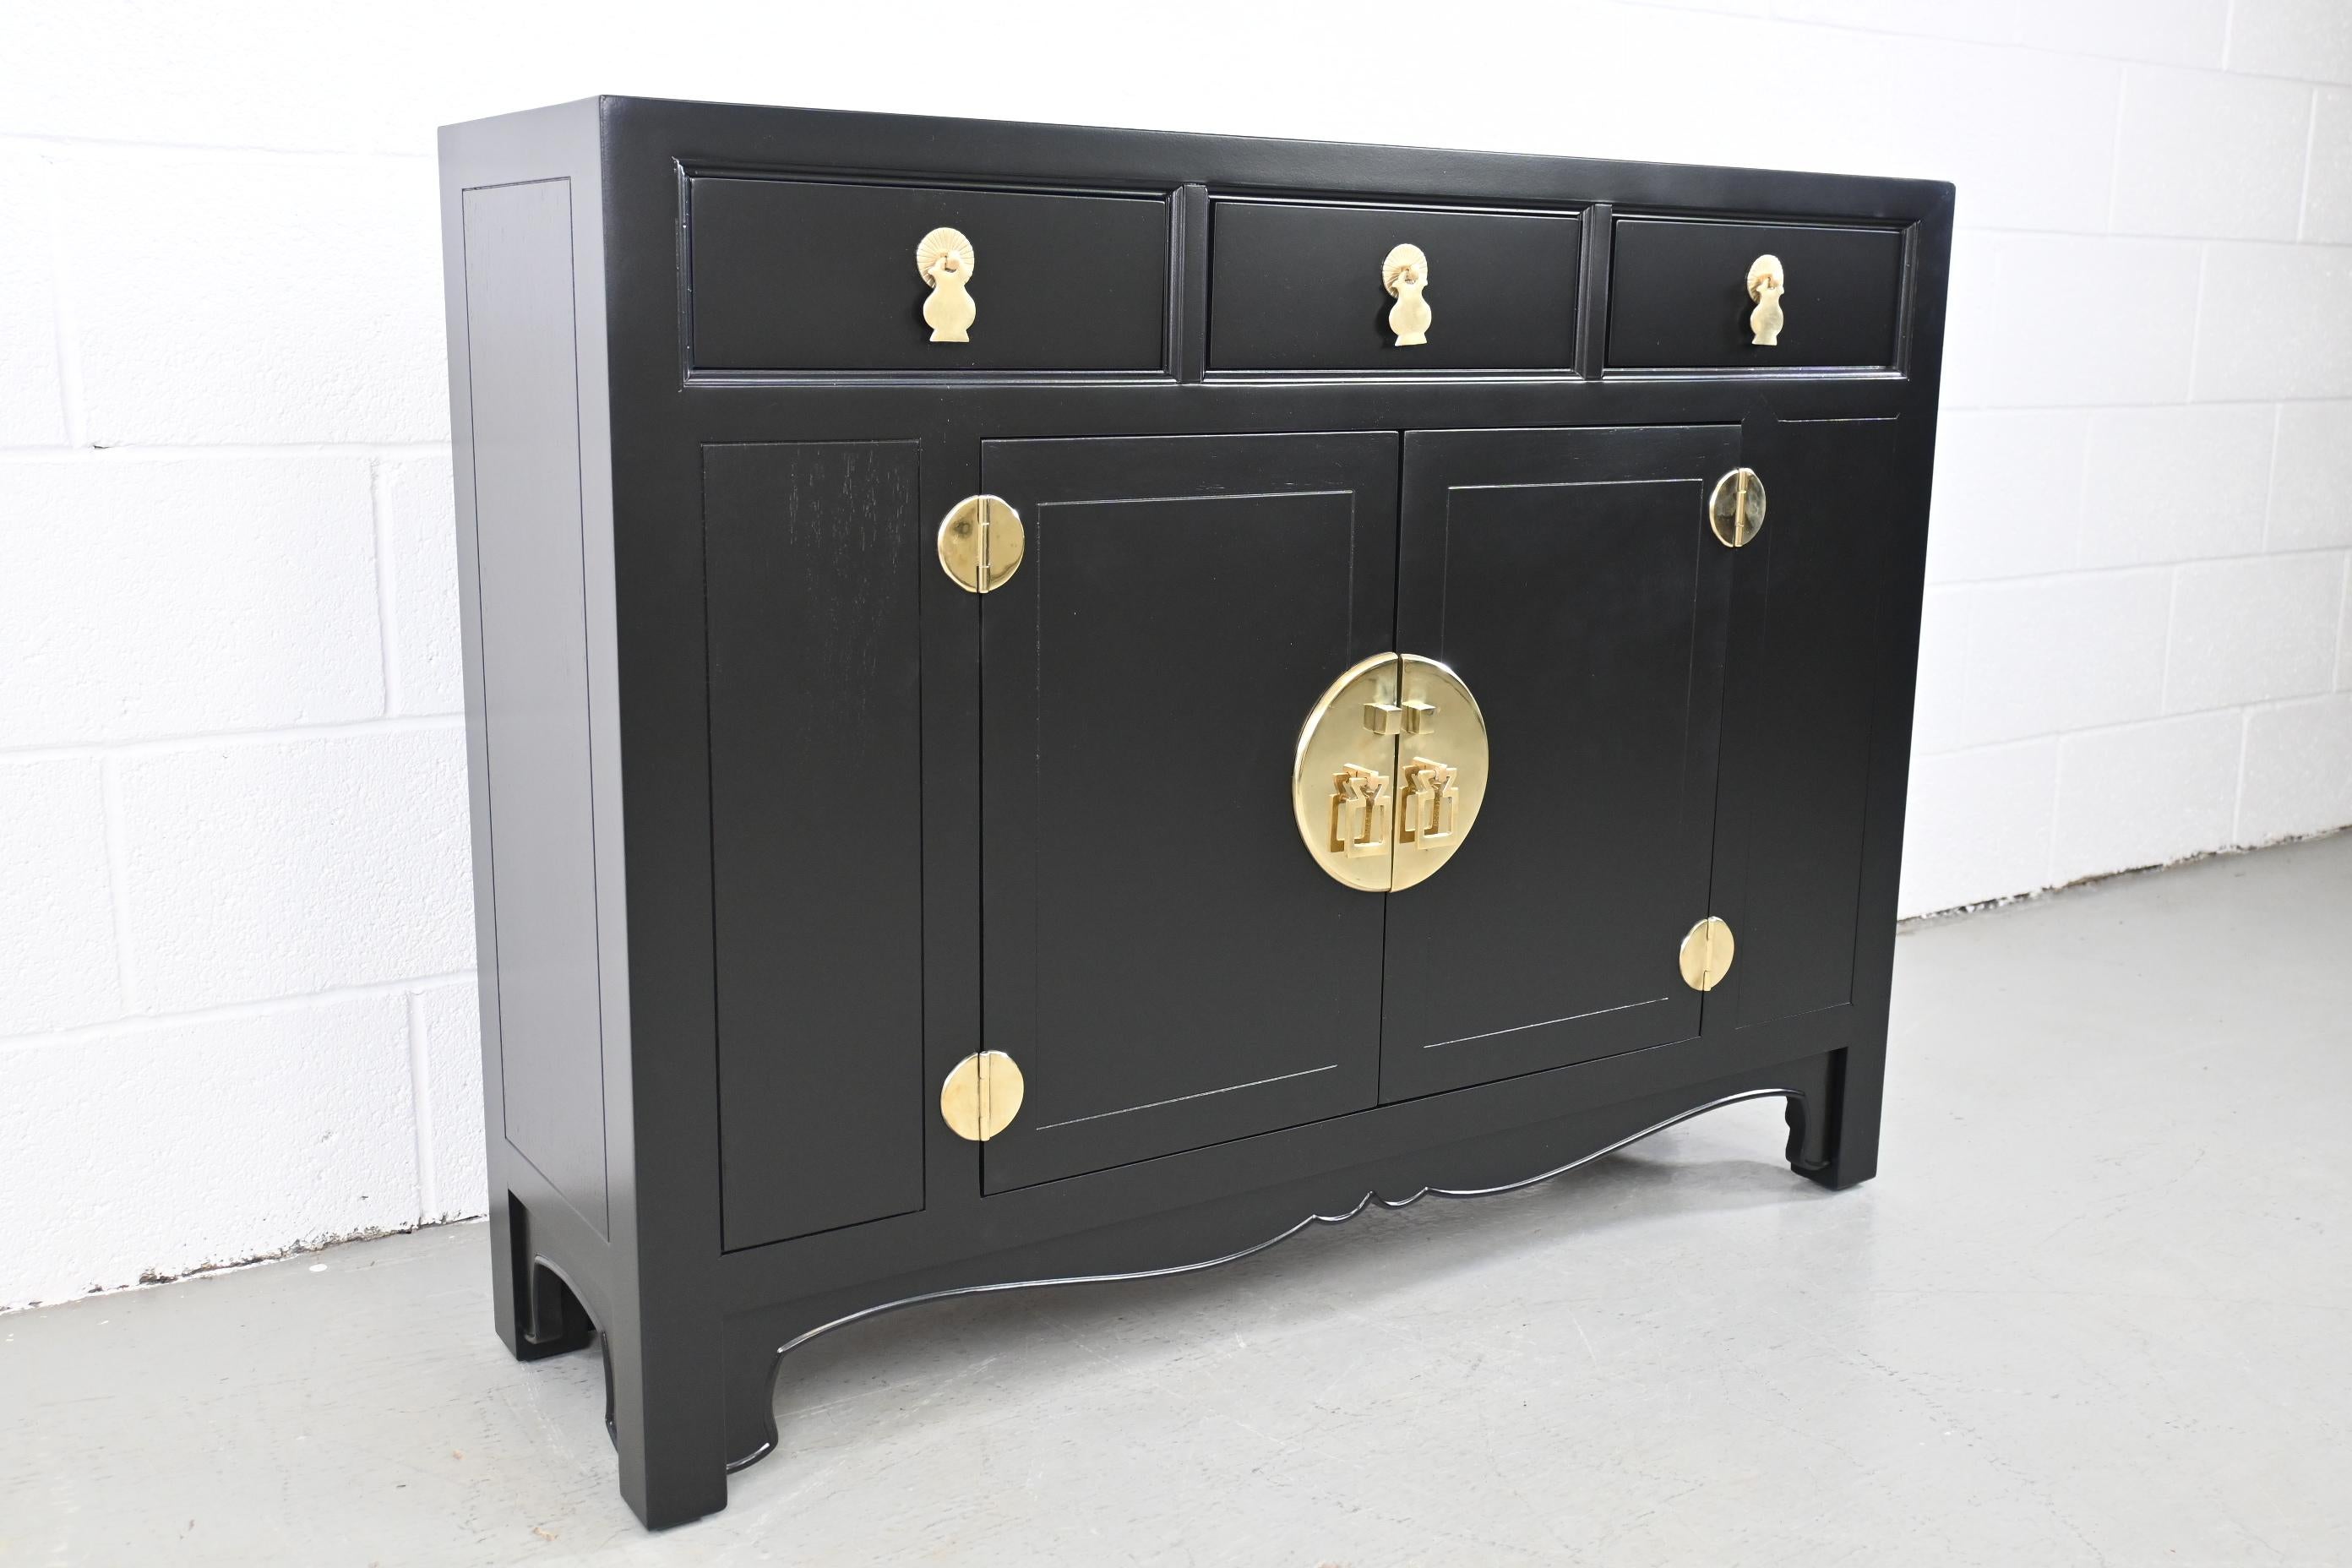 Henredon Asian Inspired Black Lacquered Petite Sideboard with Brass Accents.

Henredon, USA, 1970s

Measures: 42 Wide x 12 Deep x 32.25 High

Asian style black lacquered sideboard with three drawers and one cabinet.

Professionally